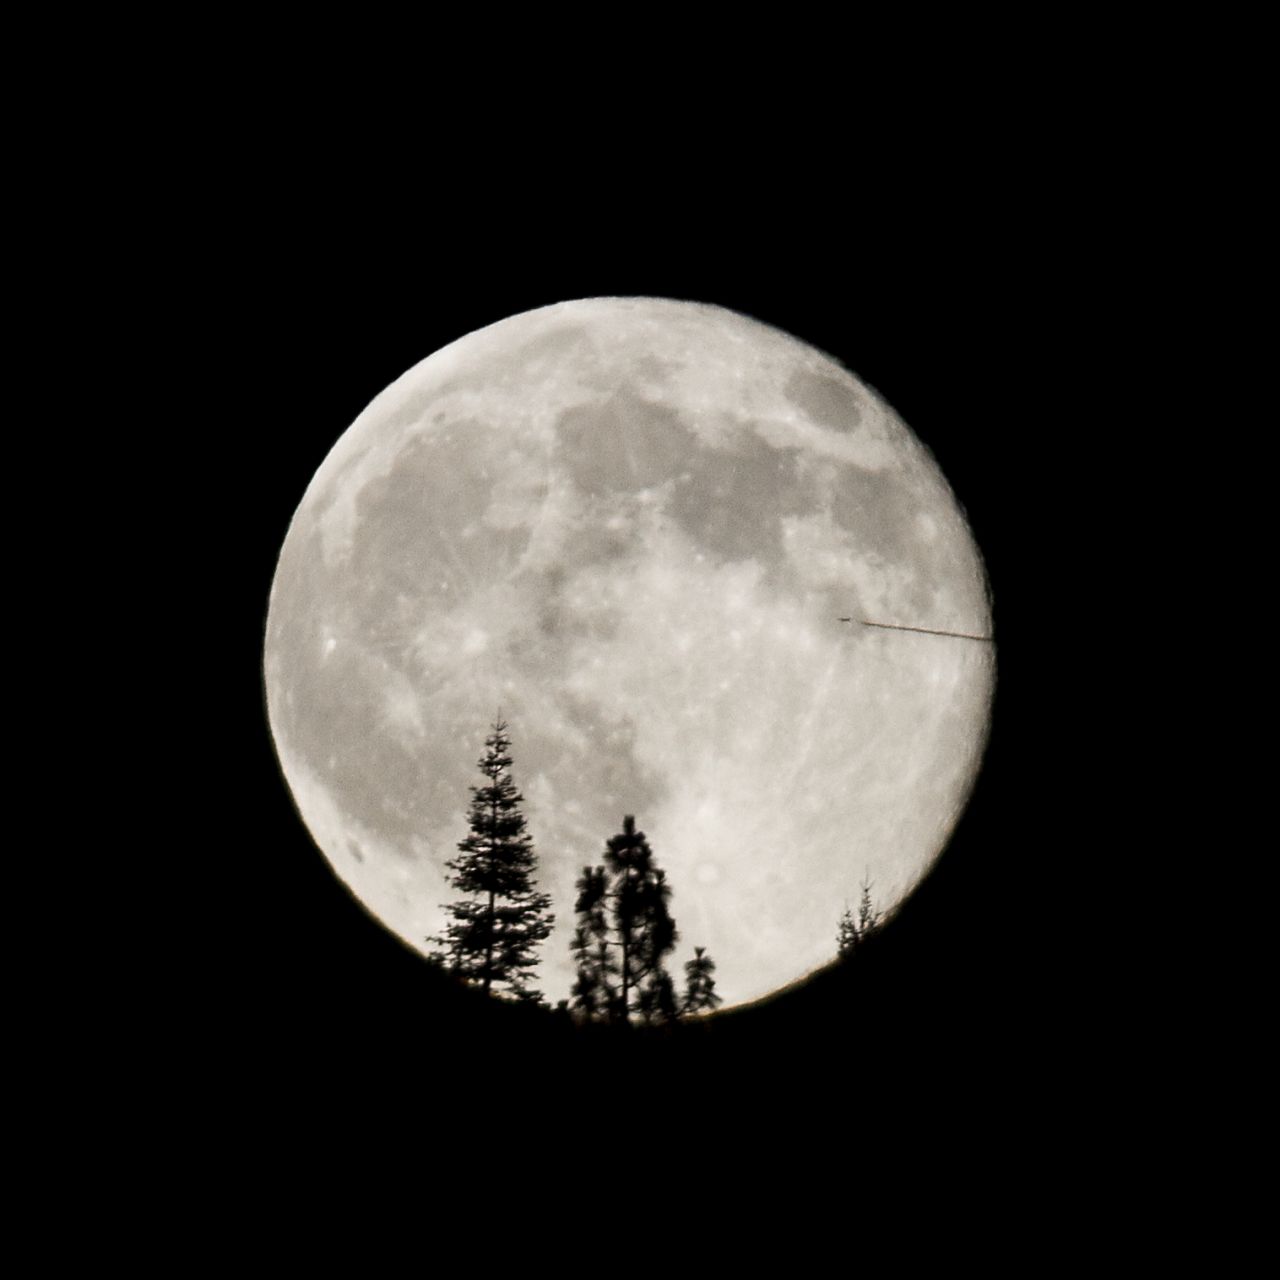 <a href="http://ireport.cnn.com/docs/DOC-1152039">Kelli Thompson</a> photographed the July supermoon from the foothills of the Sierra Nevada Mountains in California. "The airplane bisecting the supermoon was quite unusual and unexpected," she said.